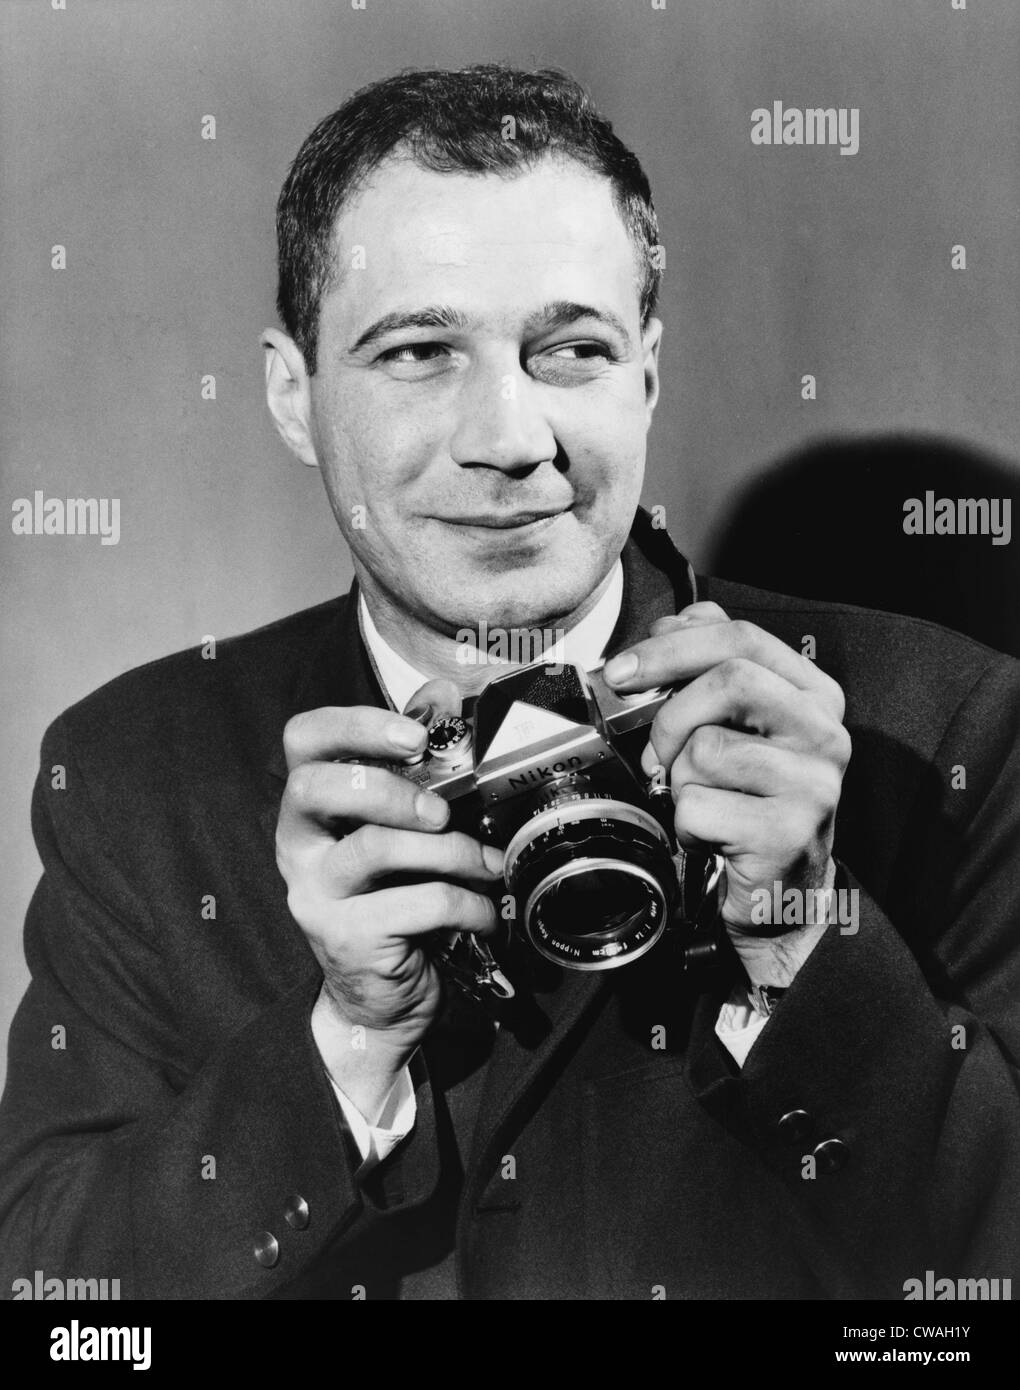 Eddie Adams (1933-2004), news photographer who won the Pulitzer Prize for his coverage of the Tet Offense in Saigon, Vietnam. Stock Photo